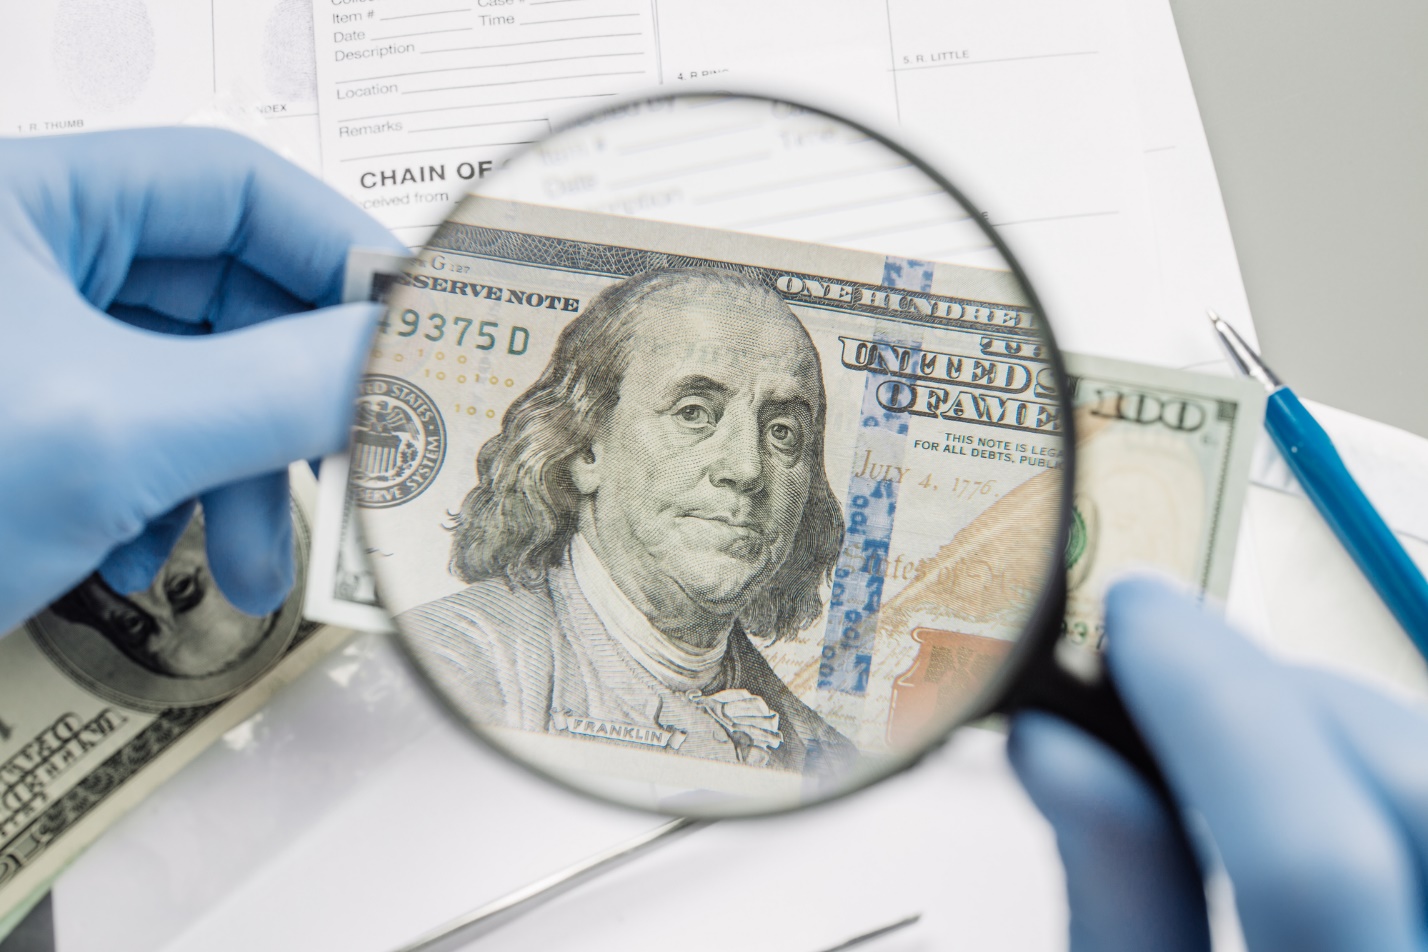 A person holding a magnifying glass looking at a dollar bill

Description automatically generated